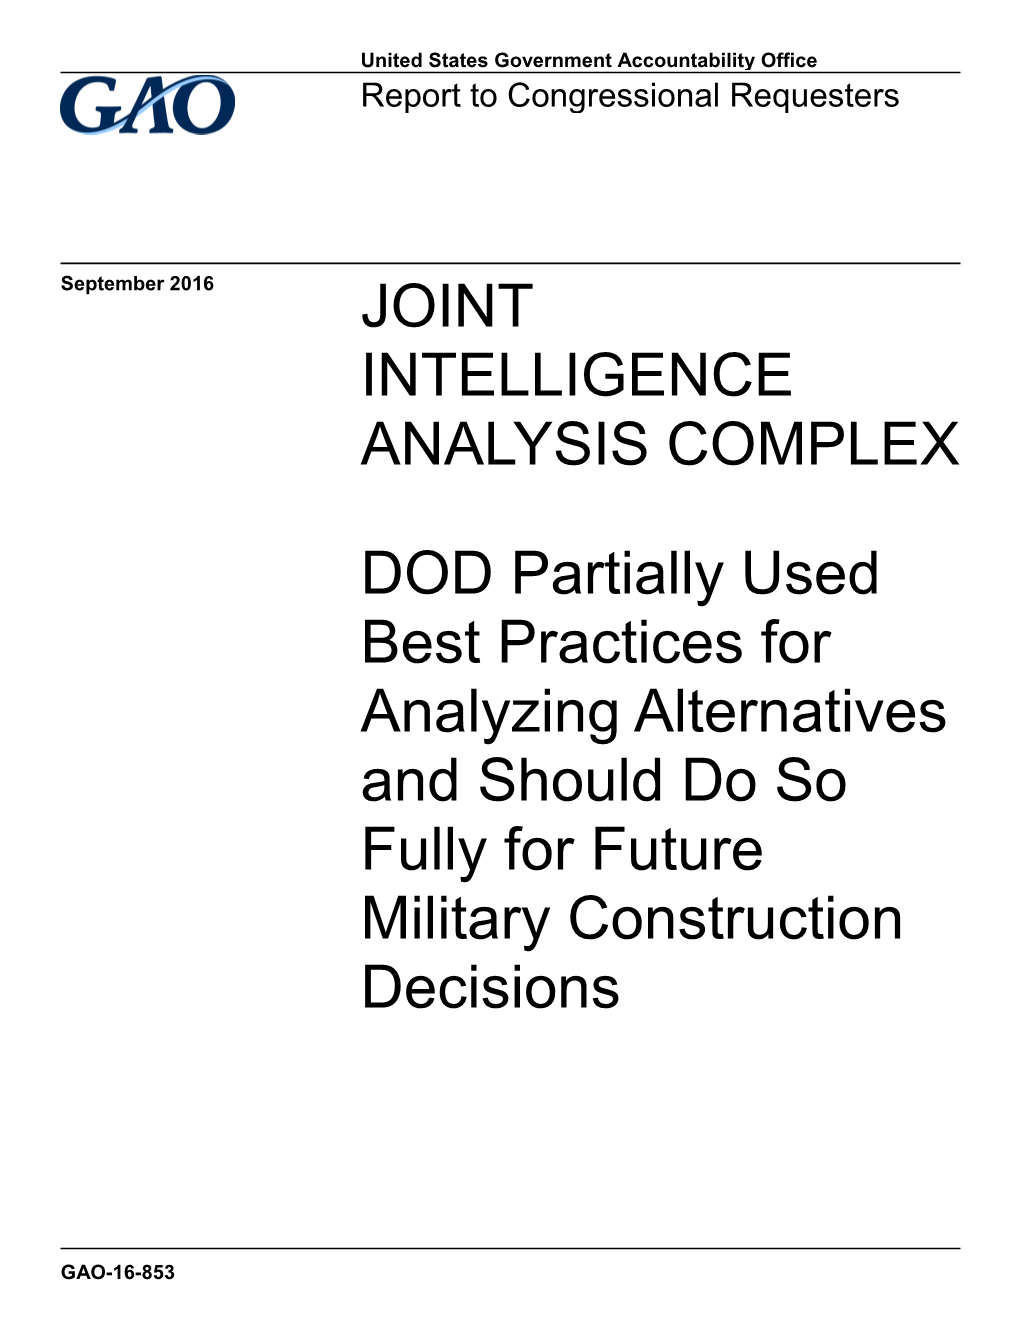 Joint Intelligence Analysis Complex